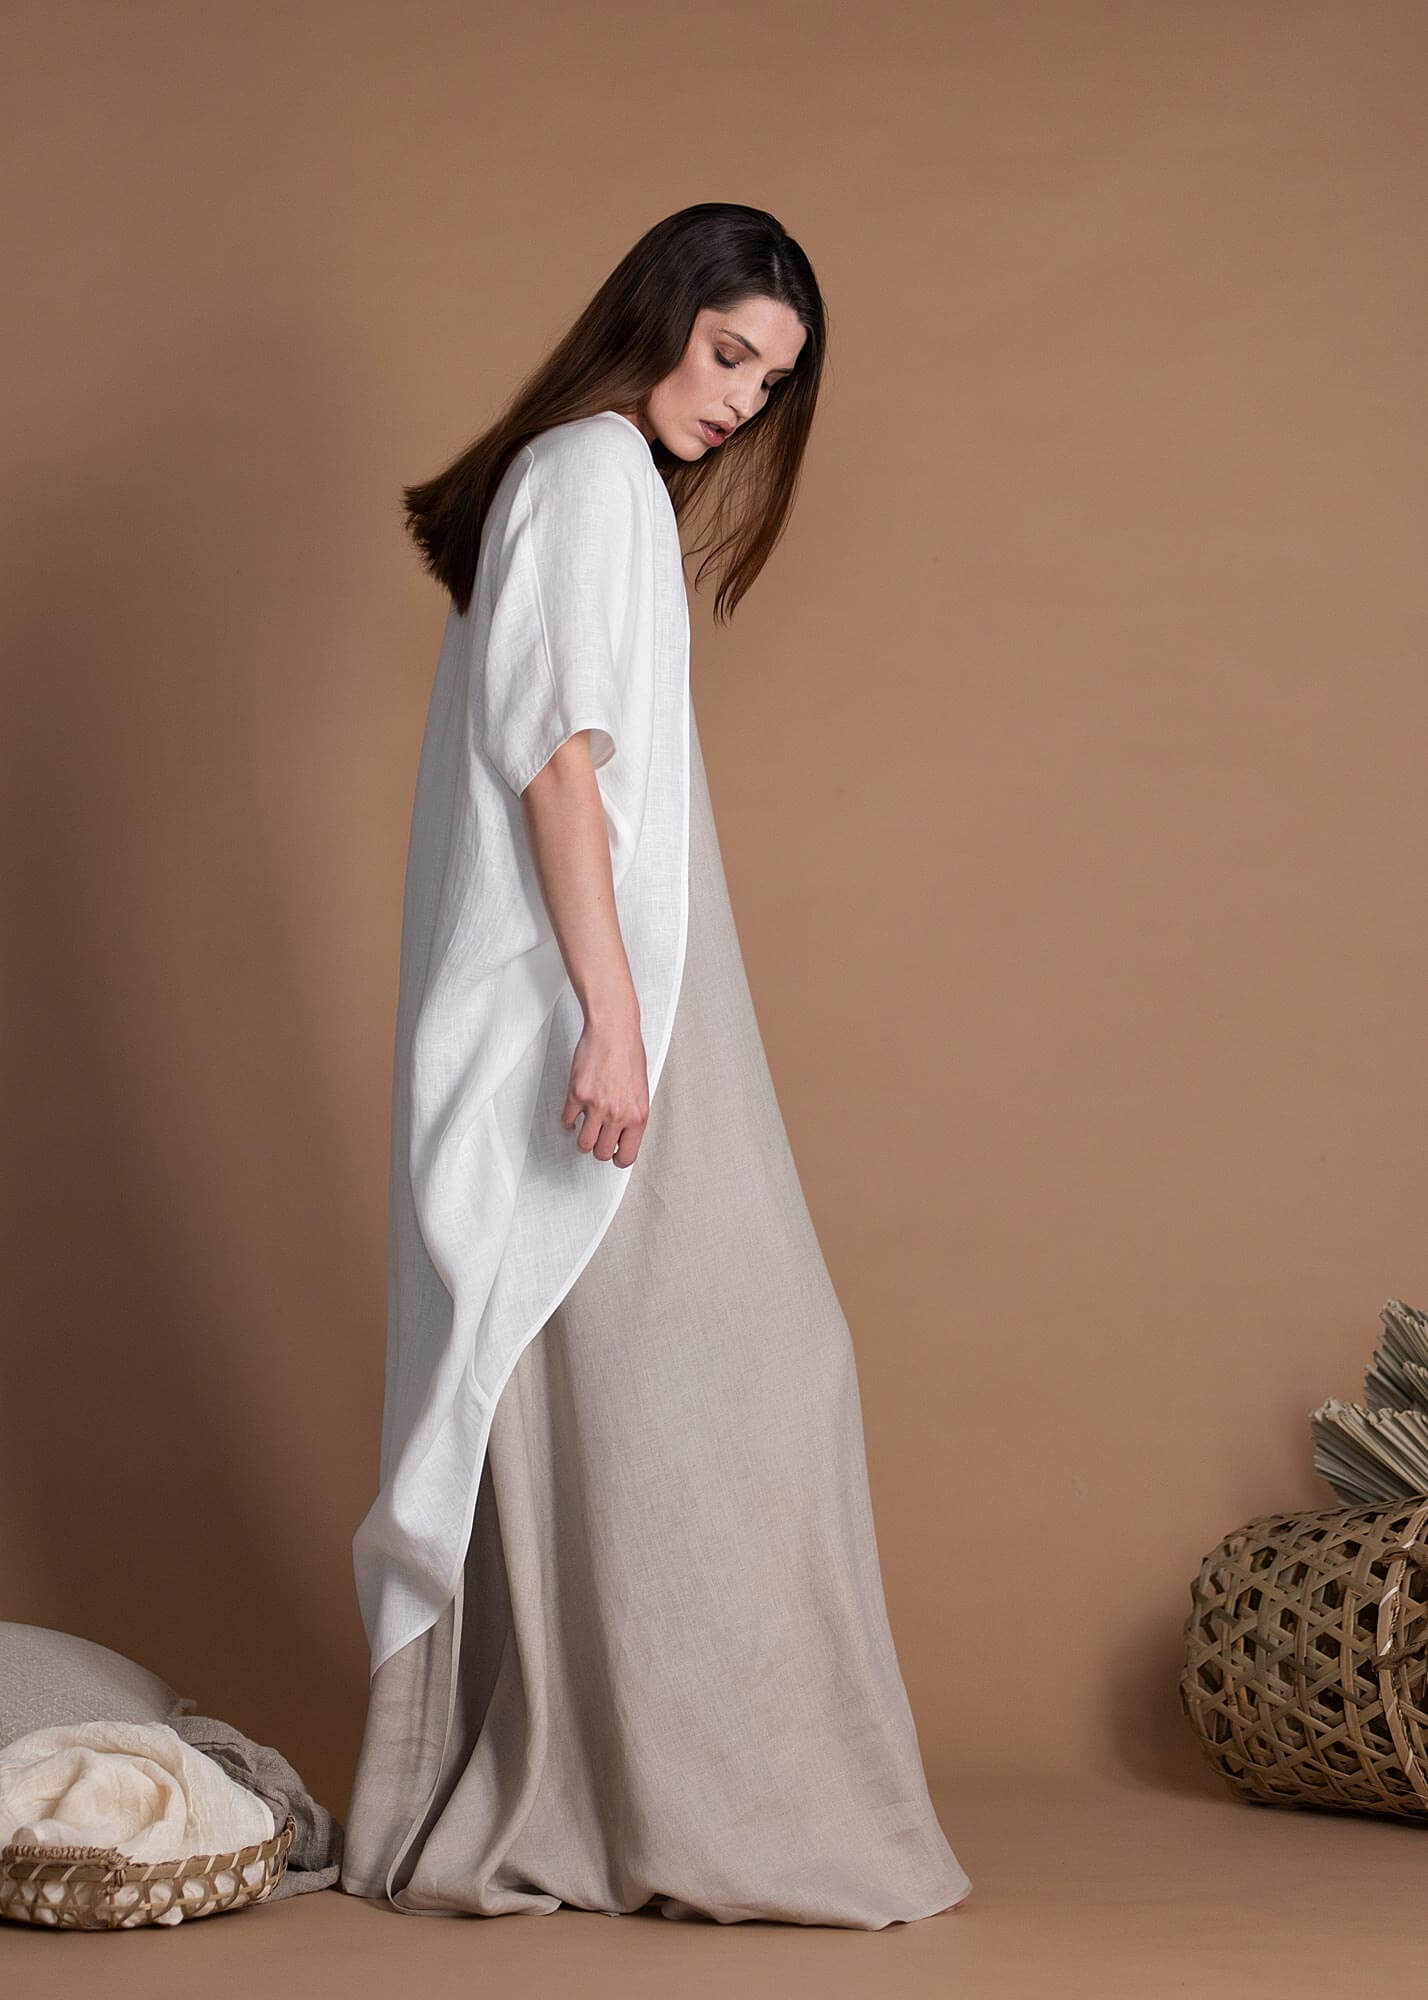 Loose Fitting Oversize White Linen Jacket With Wide Sleeves